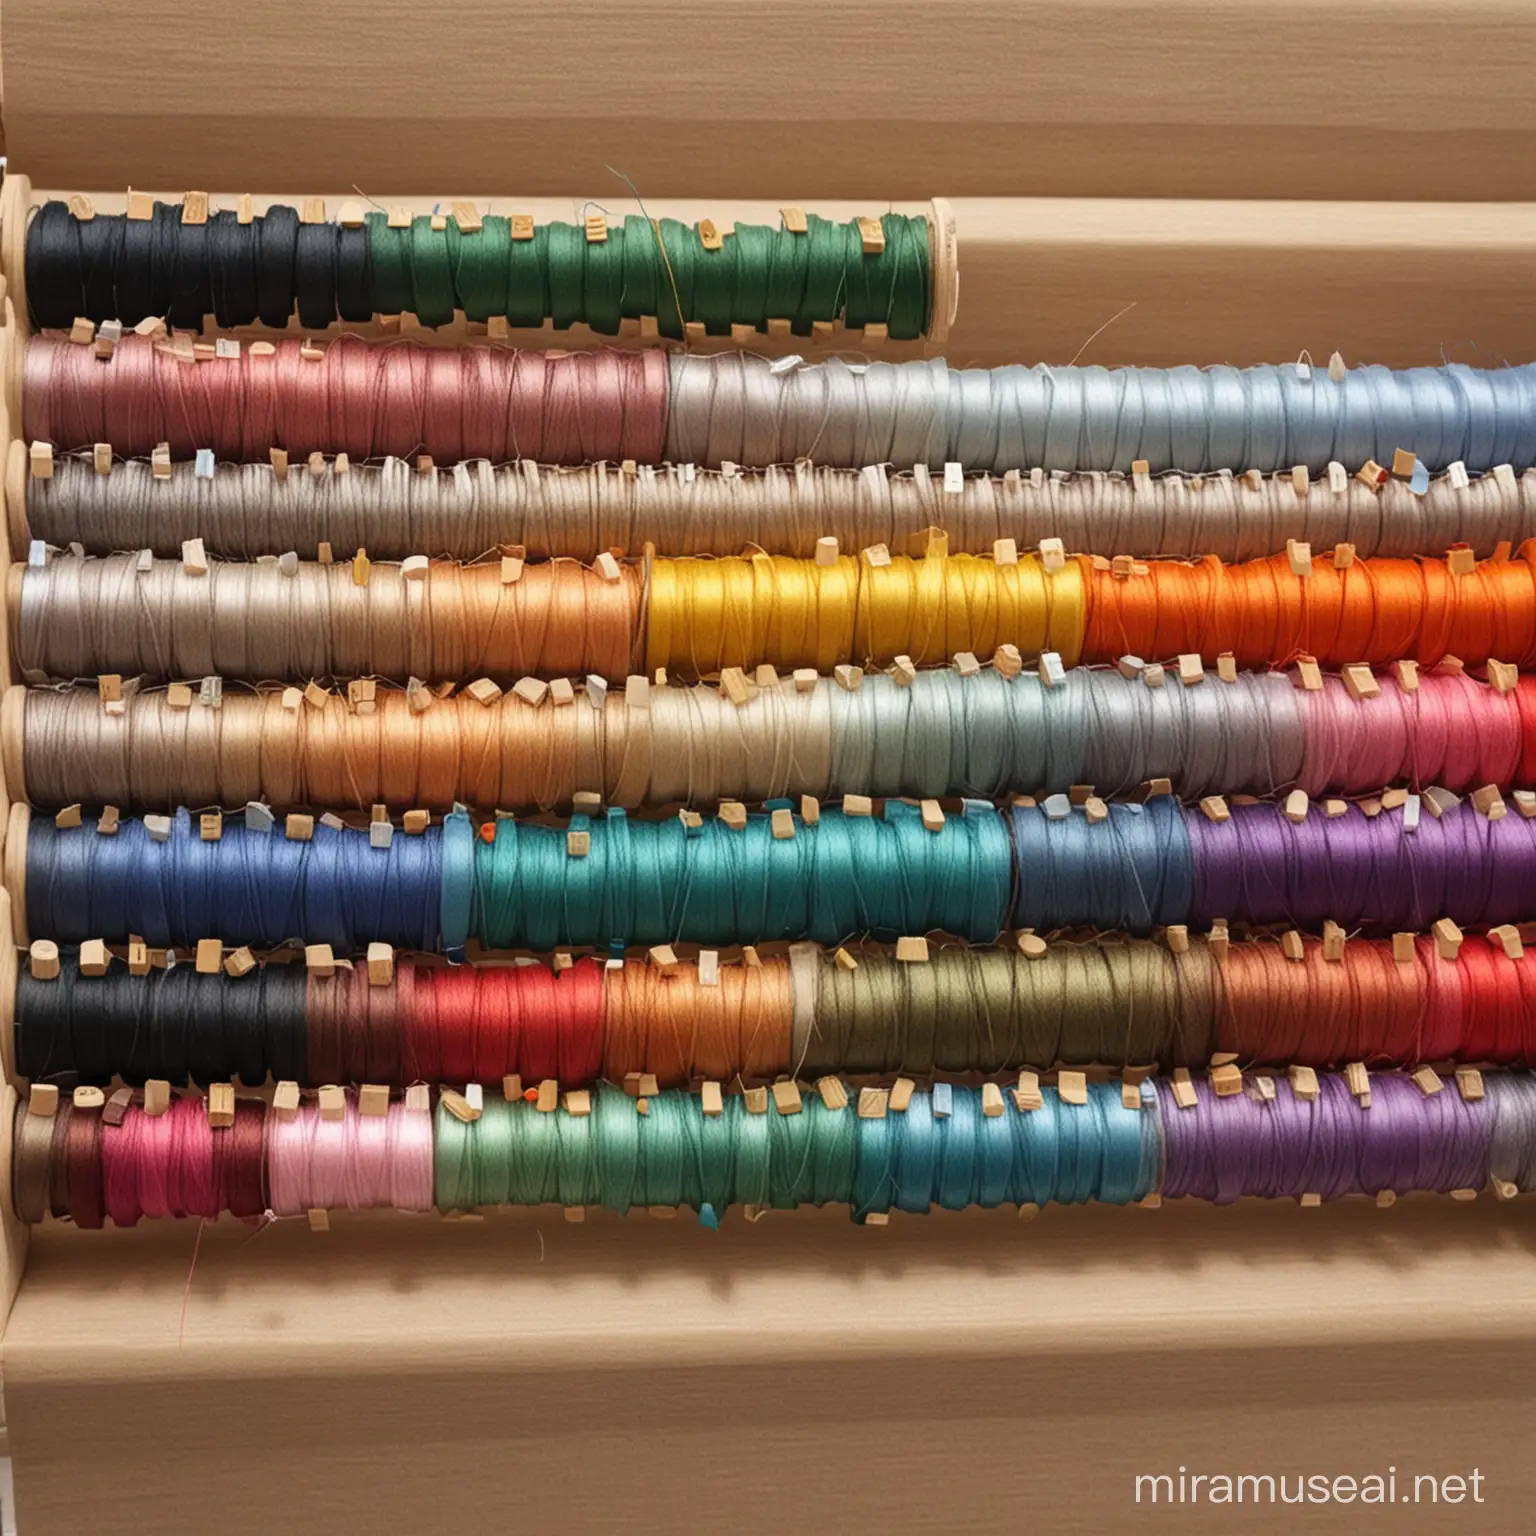   Picture of spools of colored threadThe thread is organized and neat 